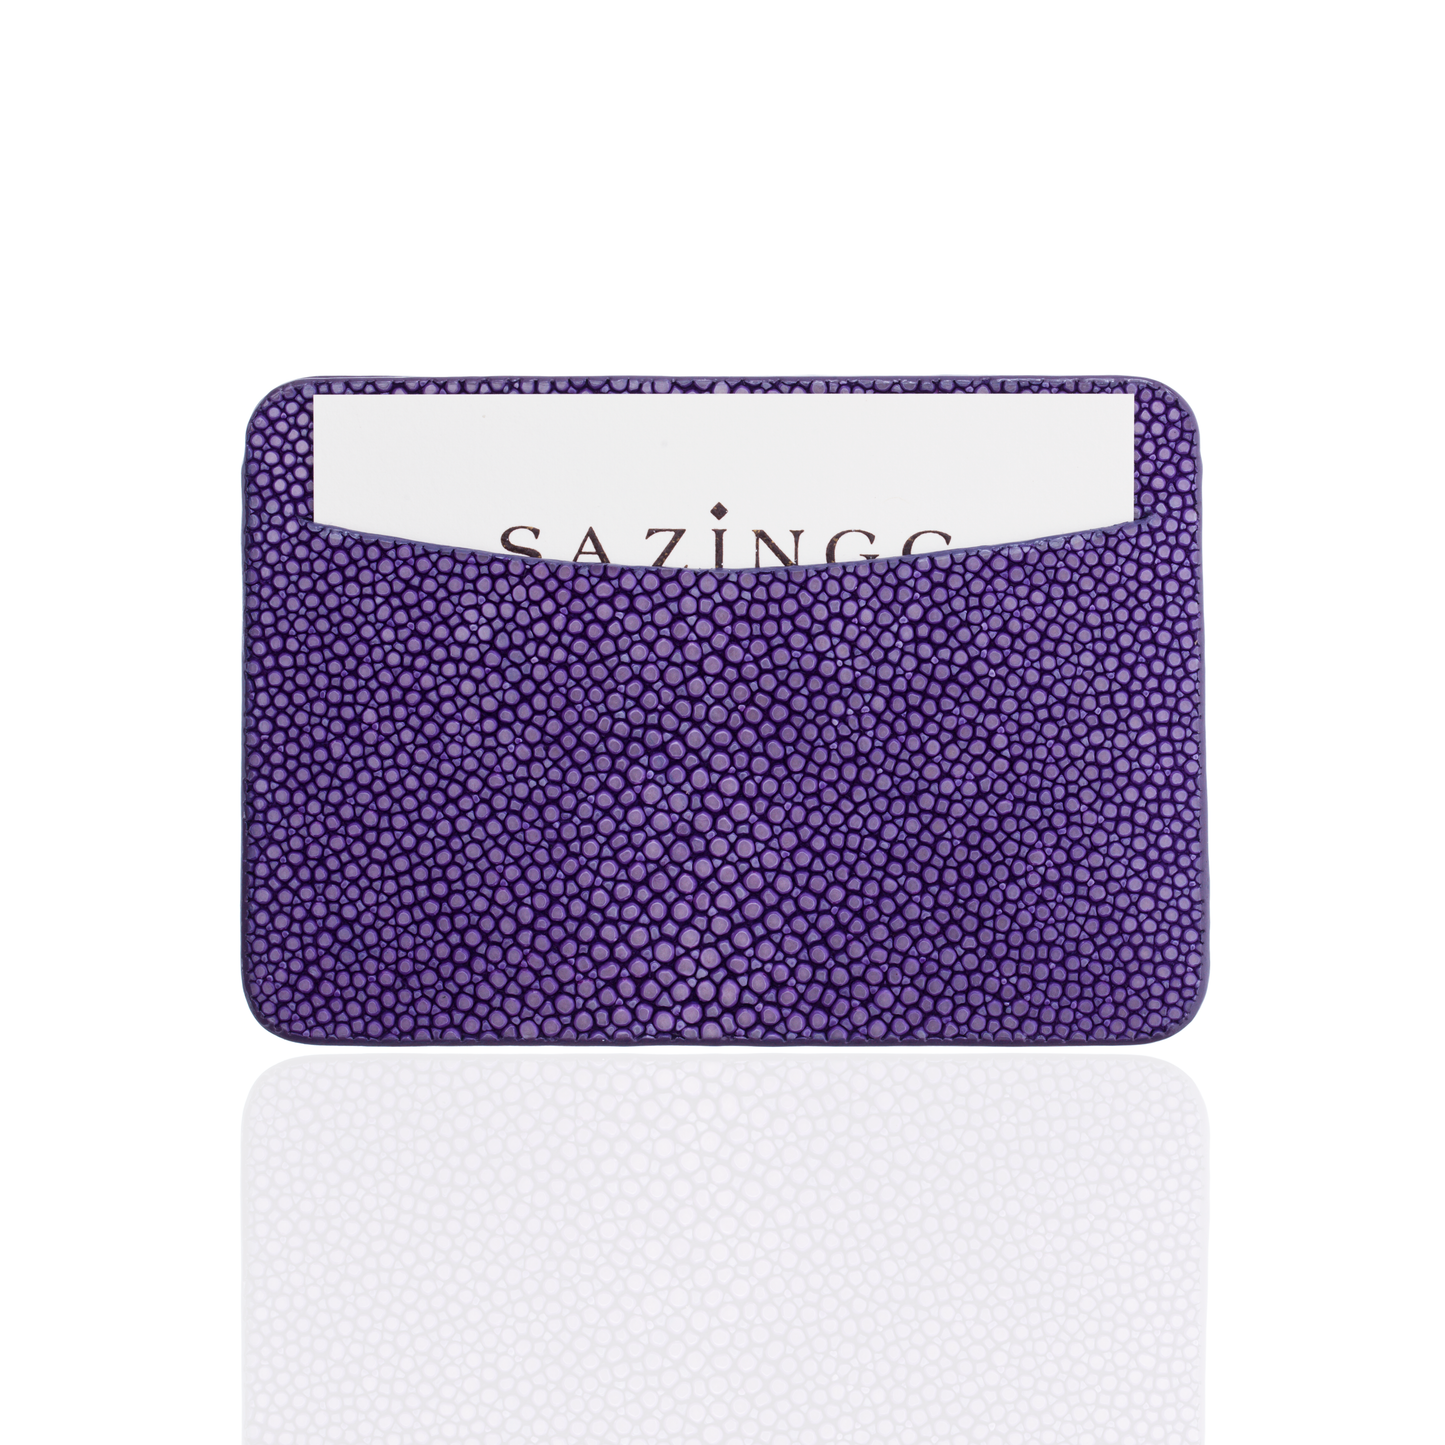 Credit Card Pouch in Purple Stingray Leather